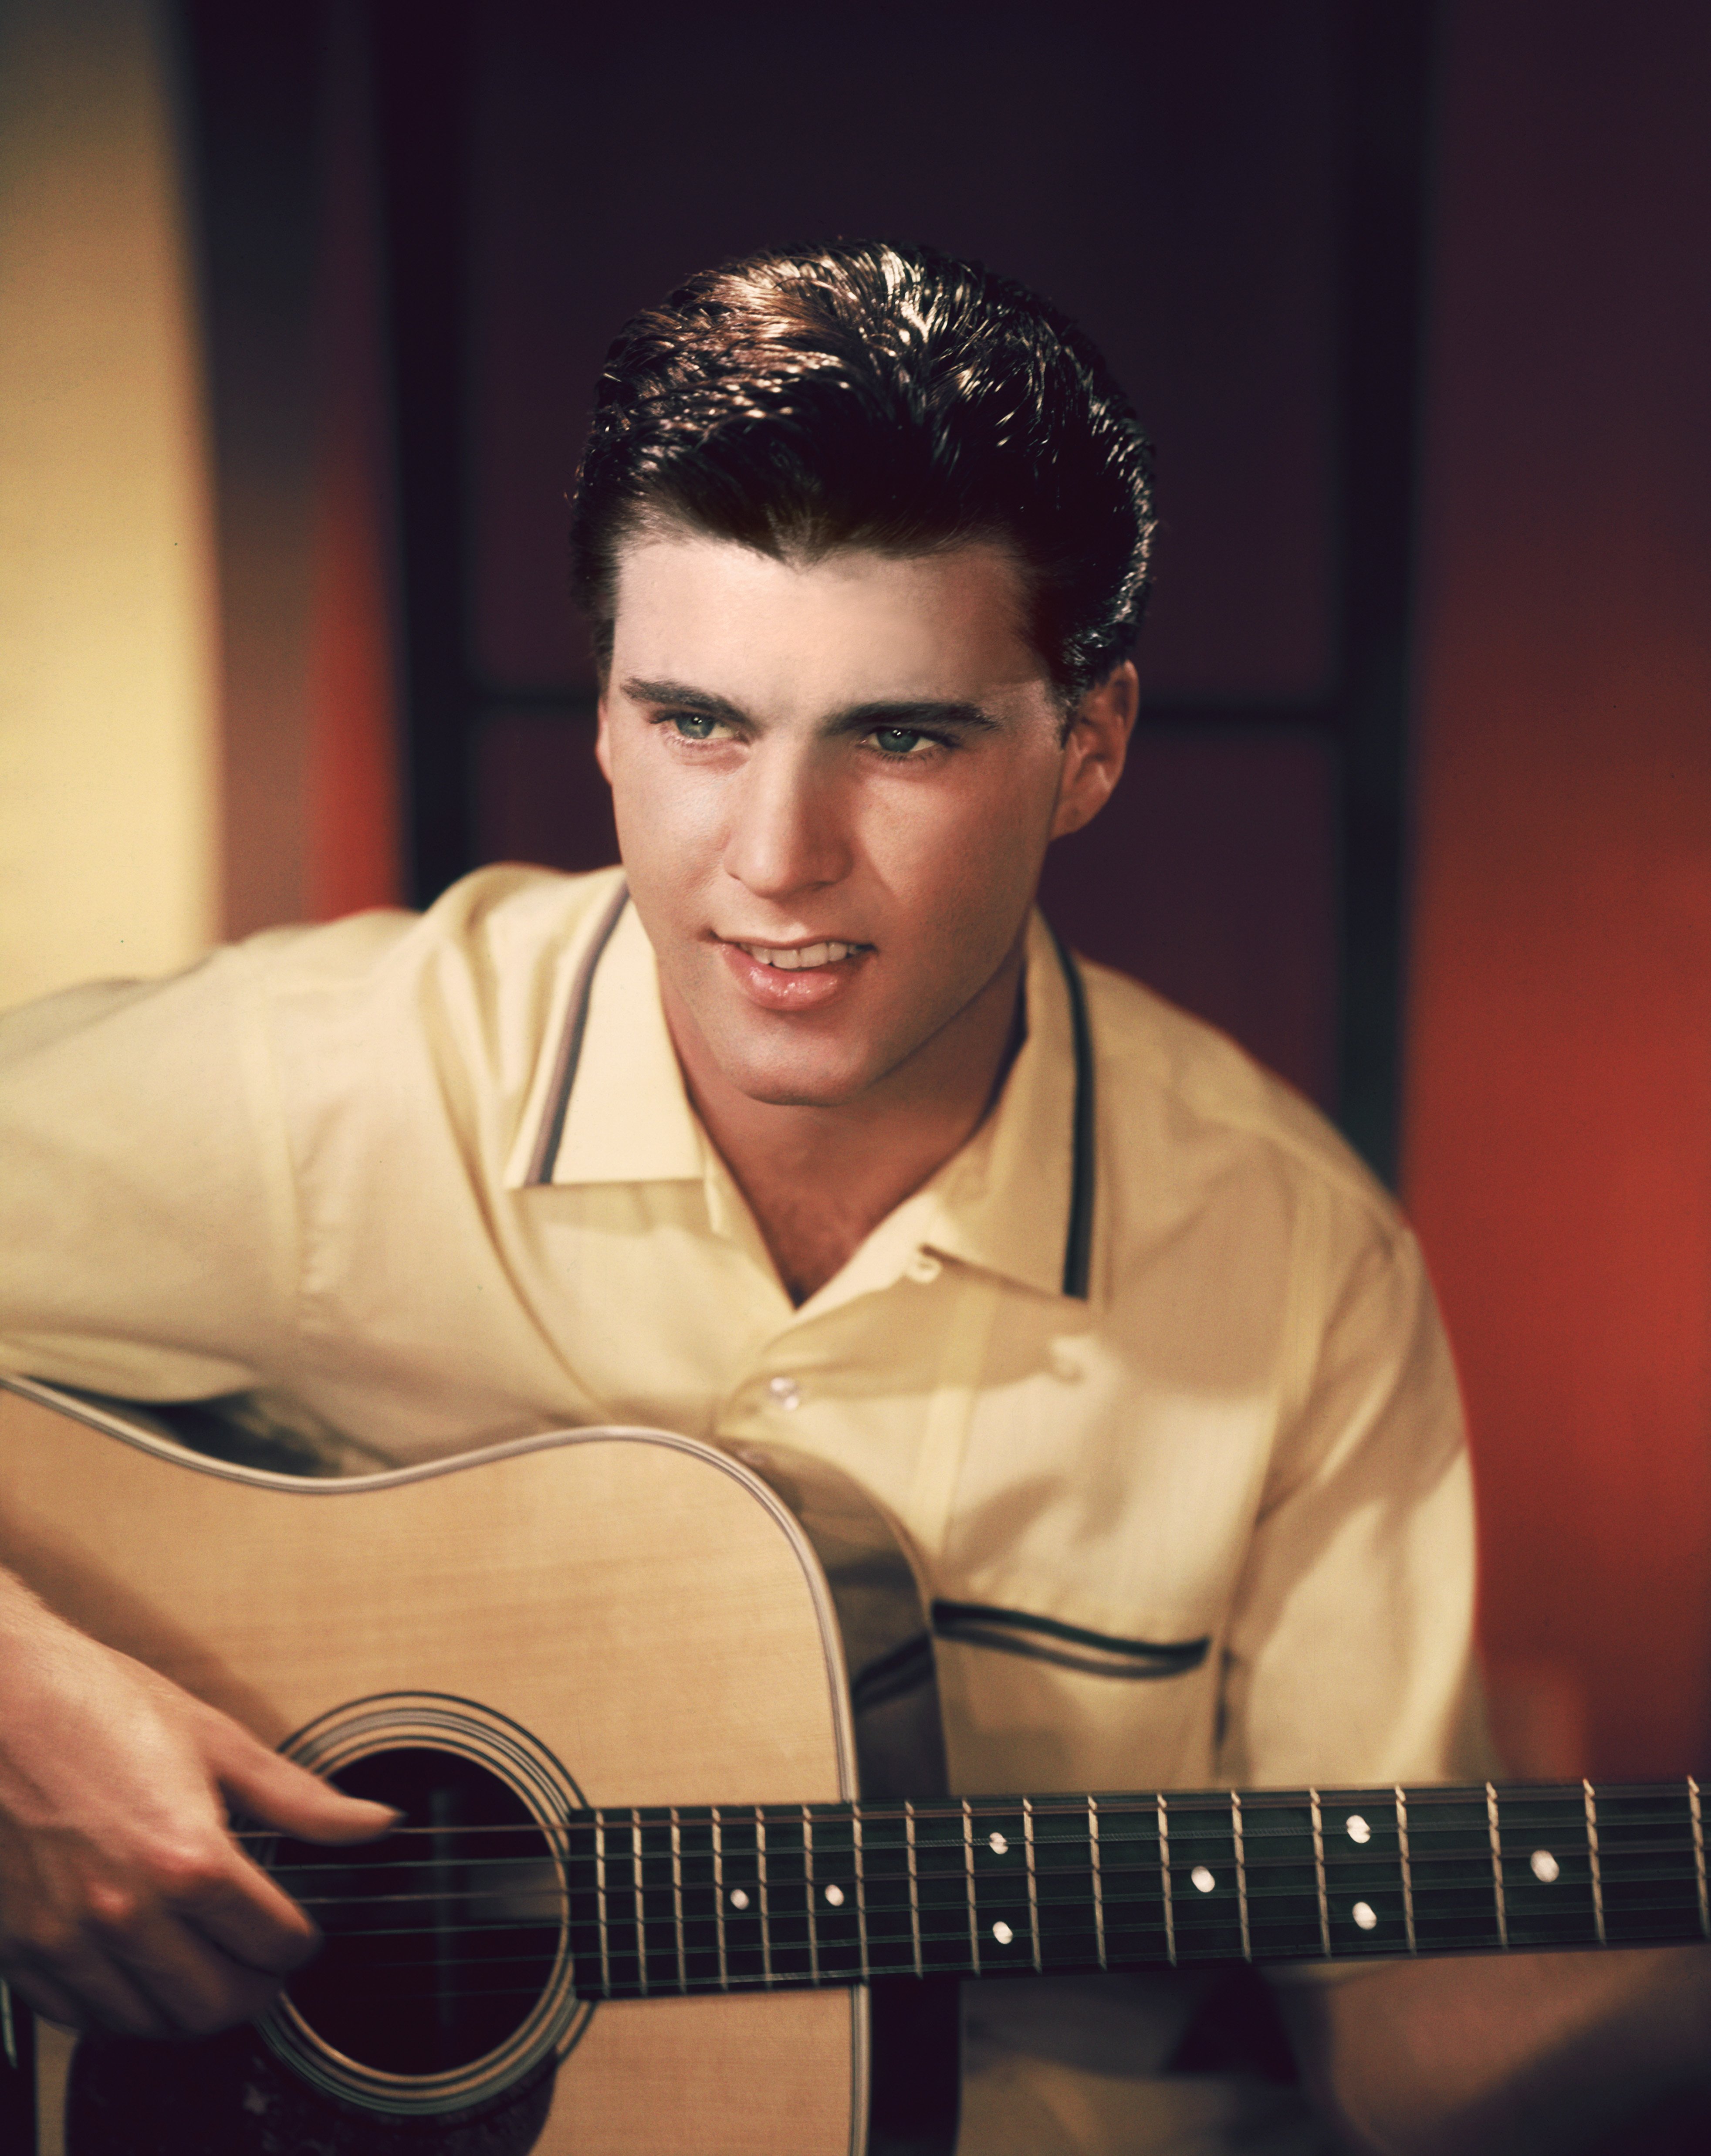 Ricky Nelson pictured in 1960 playing his guitar. | Photo: Getty Images